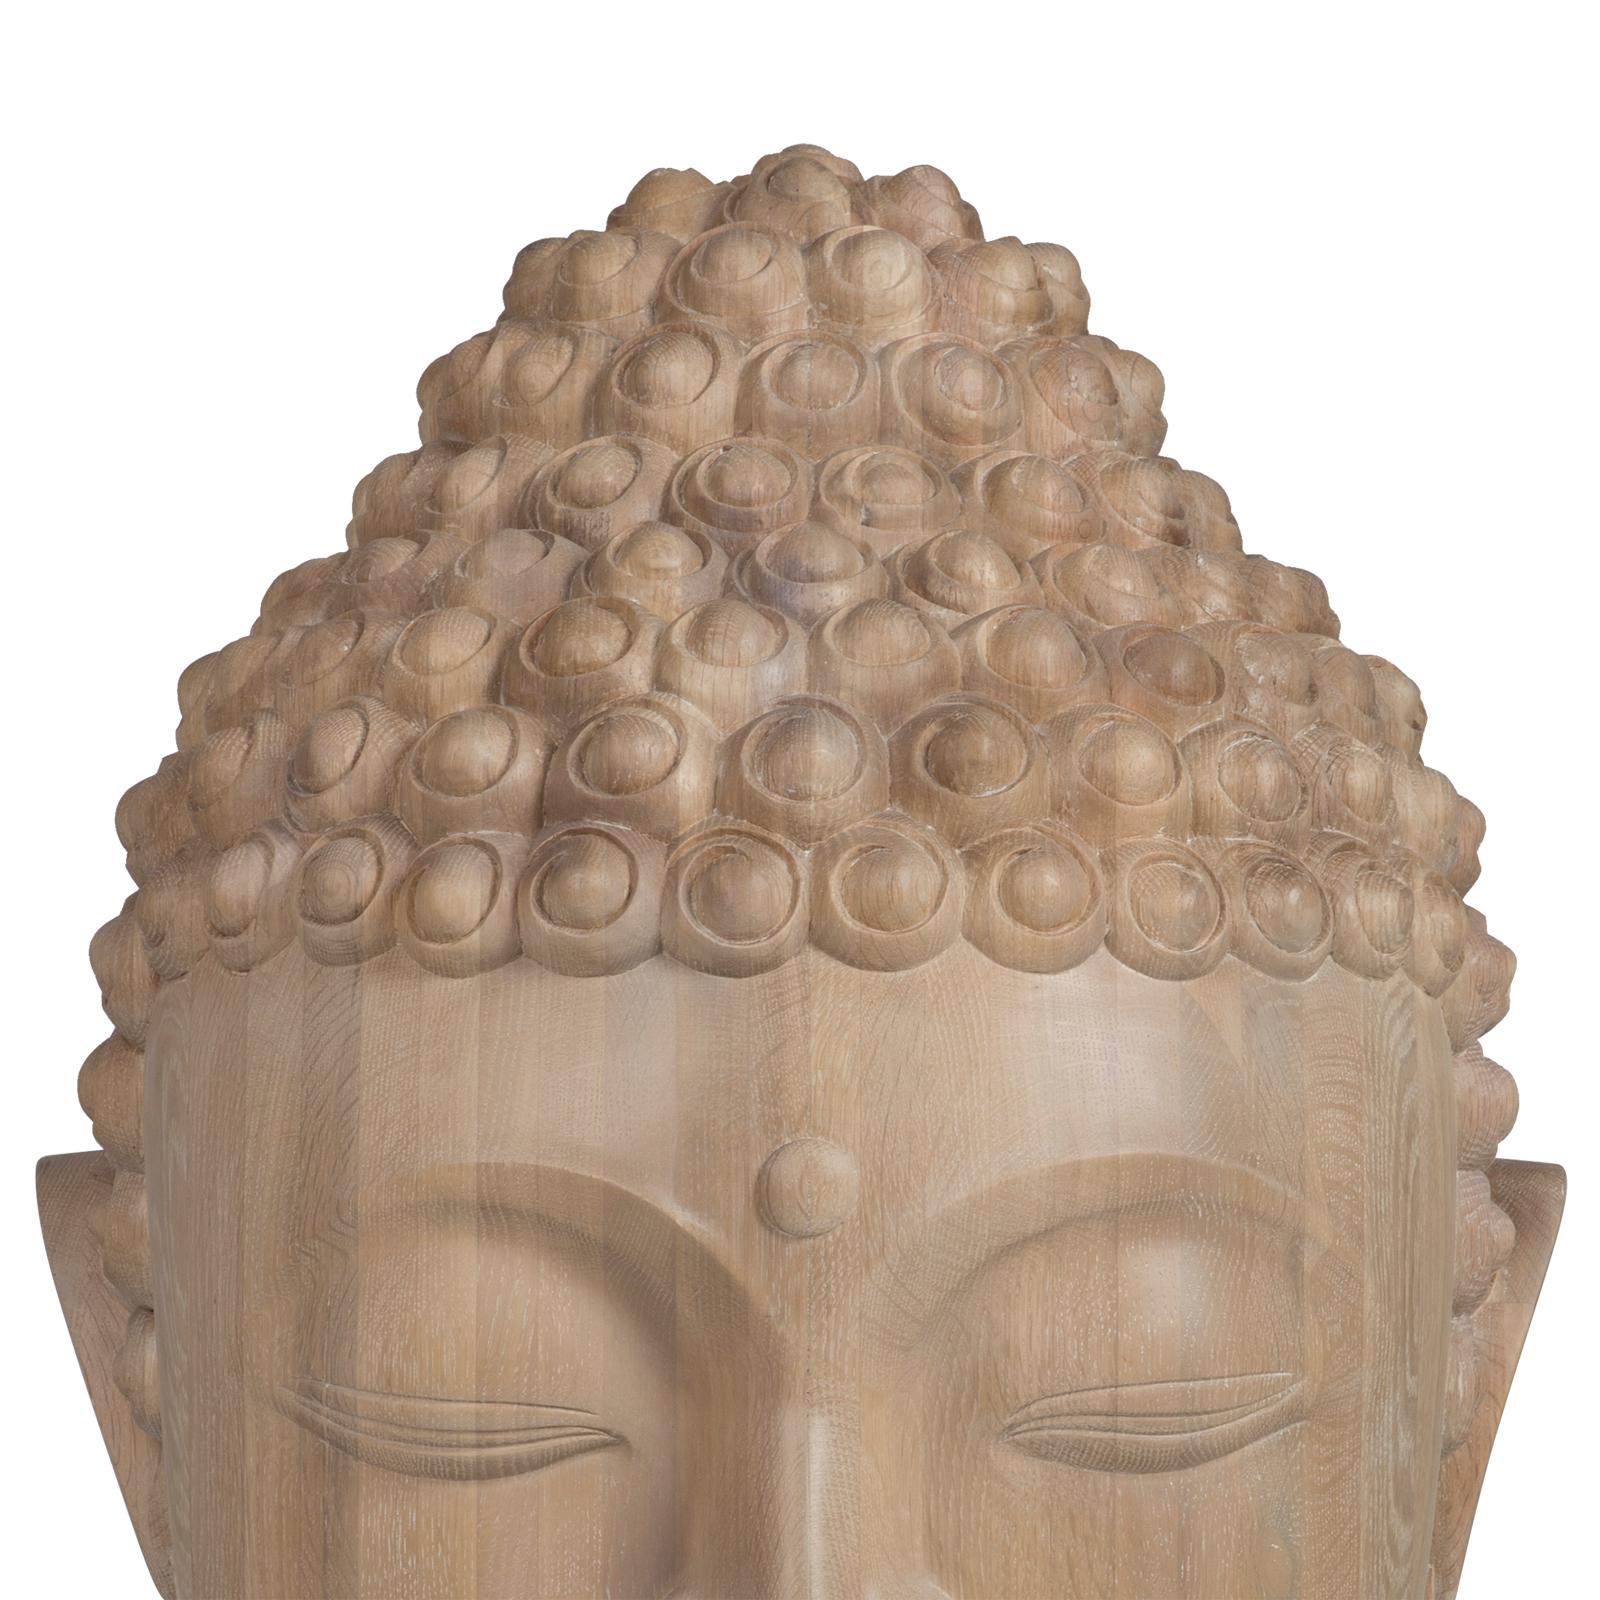 Sculpture Buddha head hand-carved in solid raw oak.
Solid wood include movement, cracks and changes in 
wood conditions, this is the essential characteristic of 
natural solid wood due to natural settlement and different 
environmental conditions.